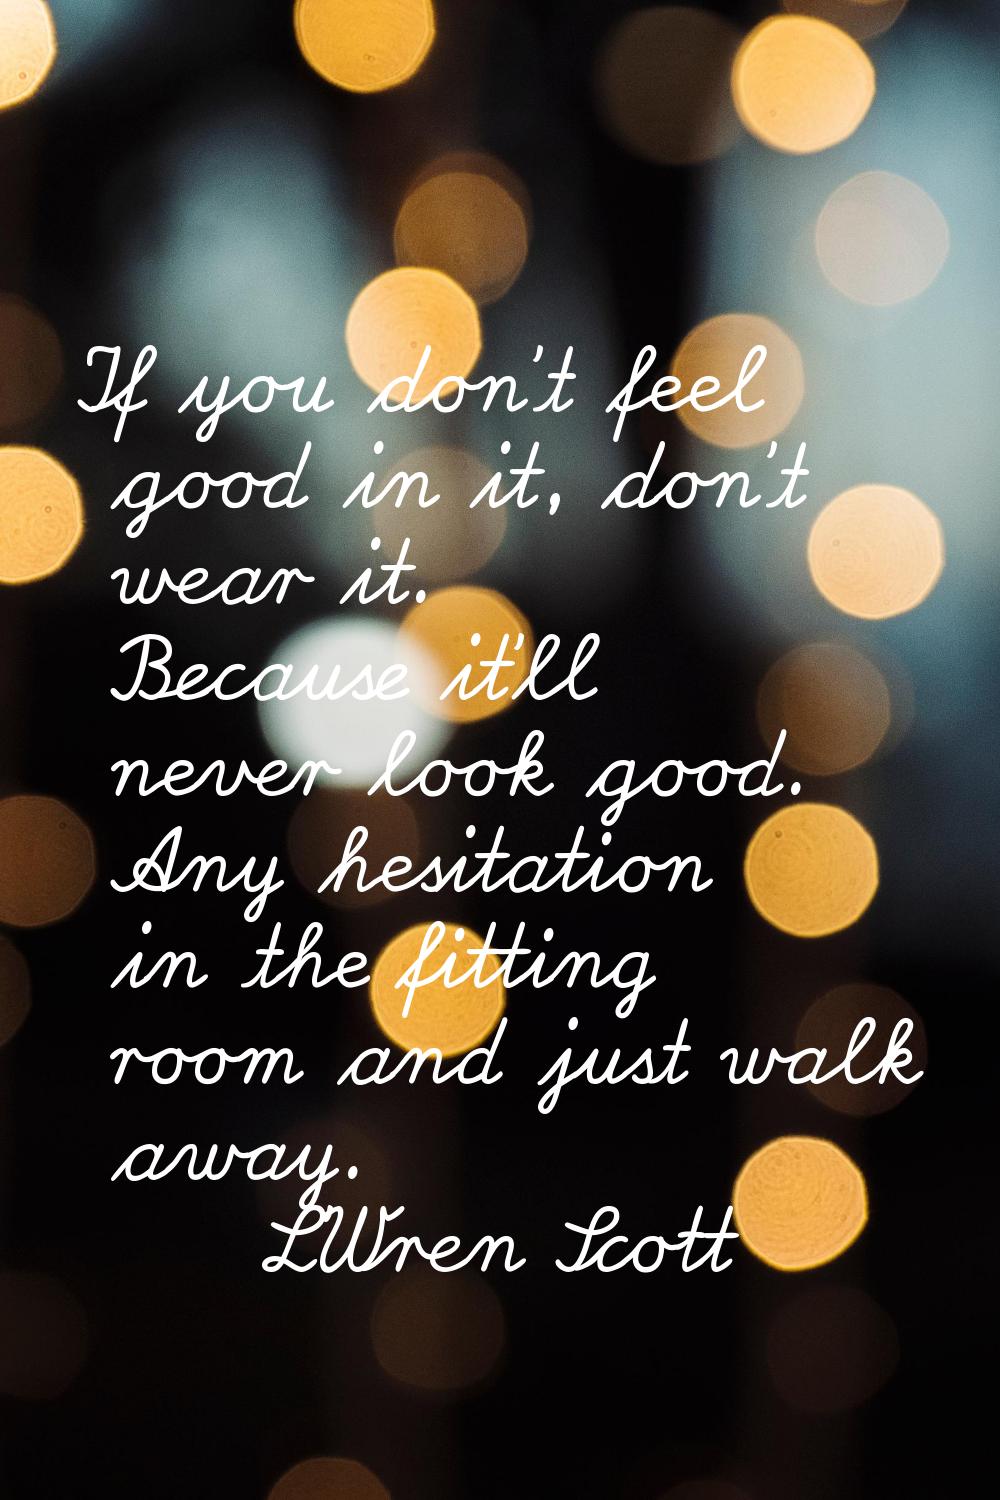 If you don't feel good in it, don't wear it. Because it'll never look good. Any hesitation in the f